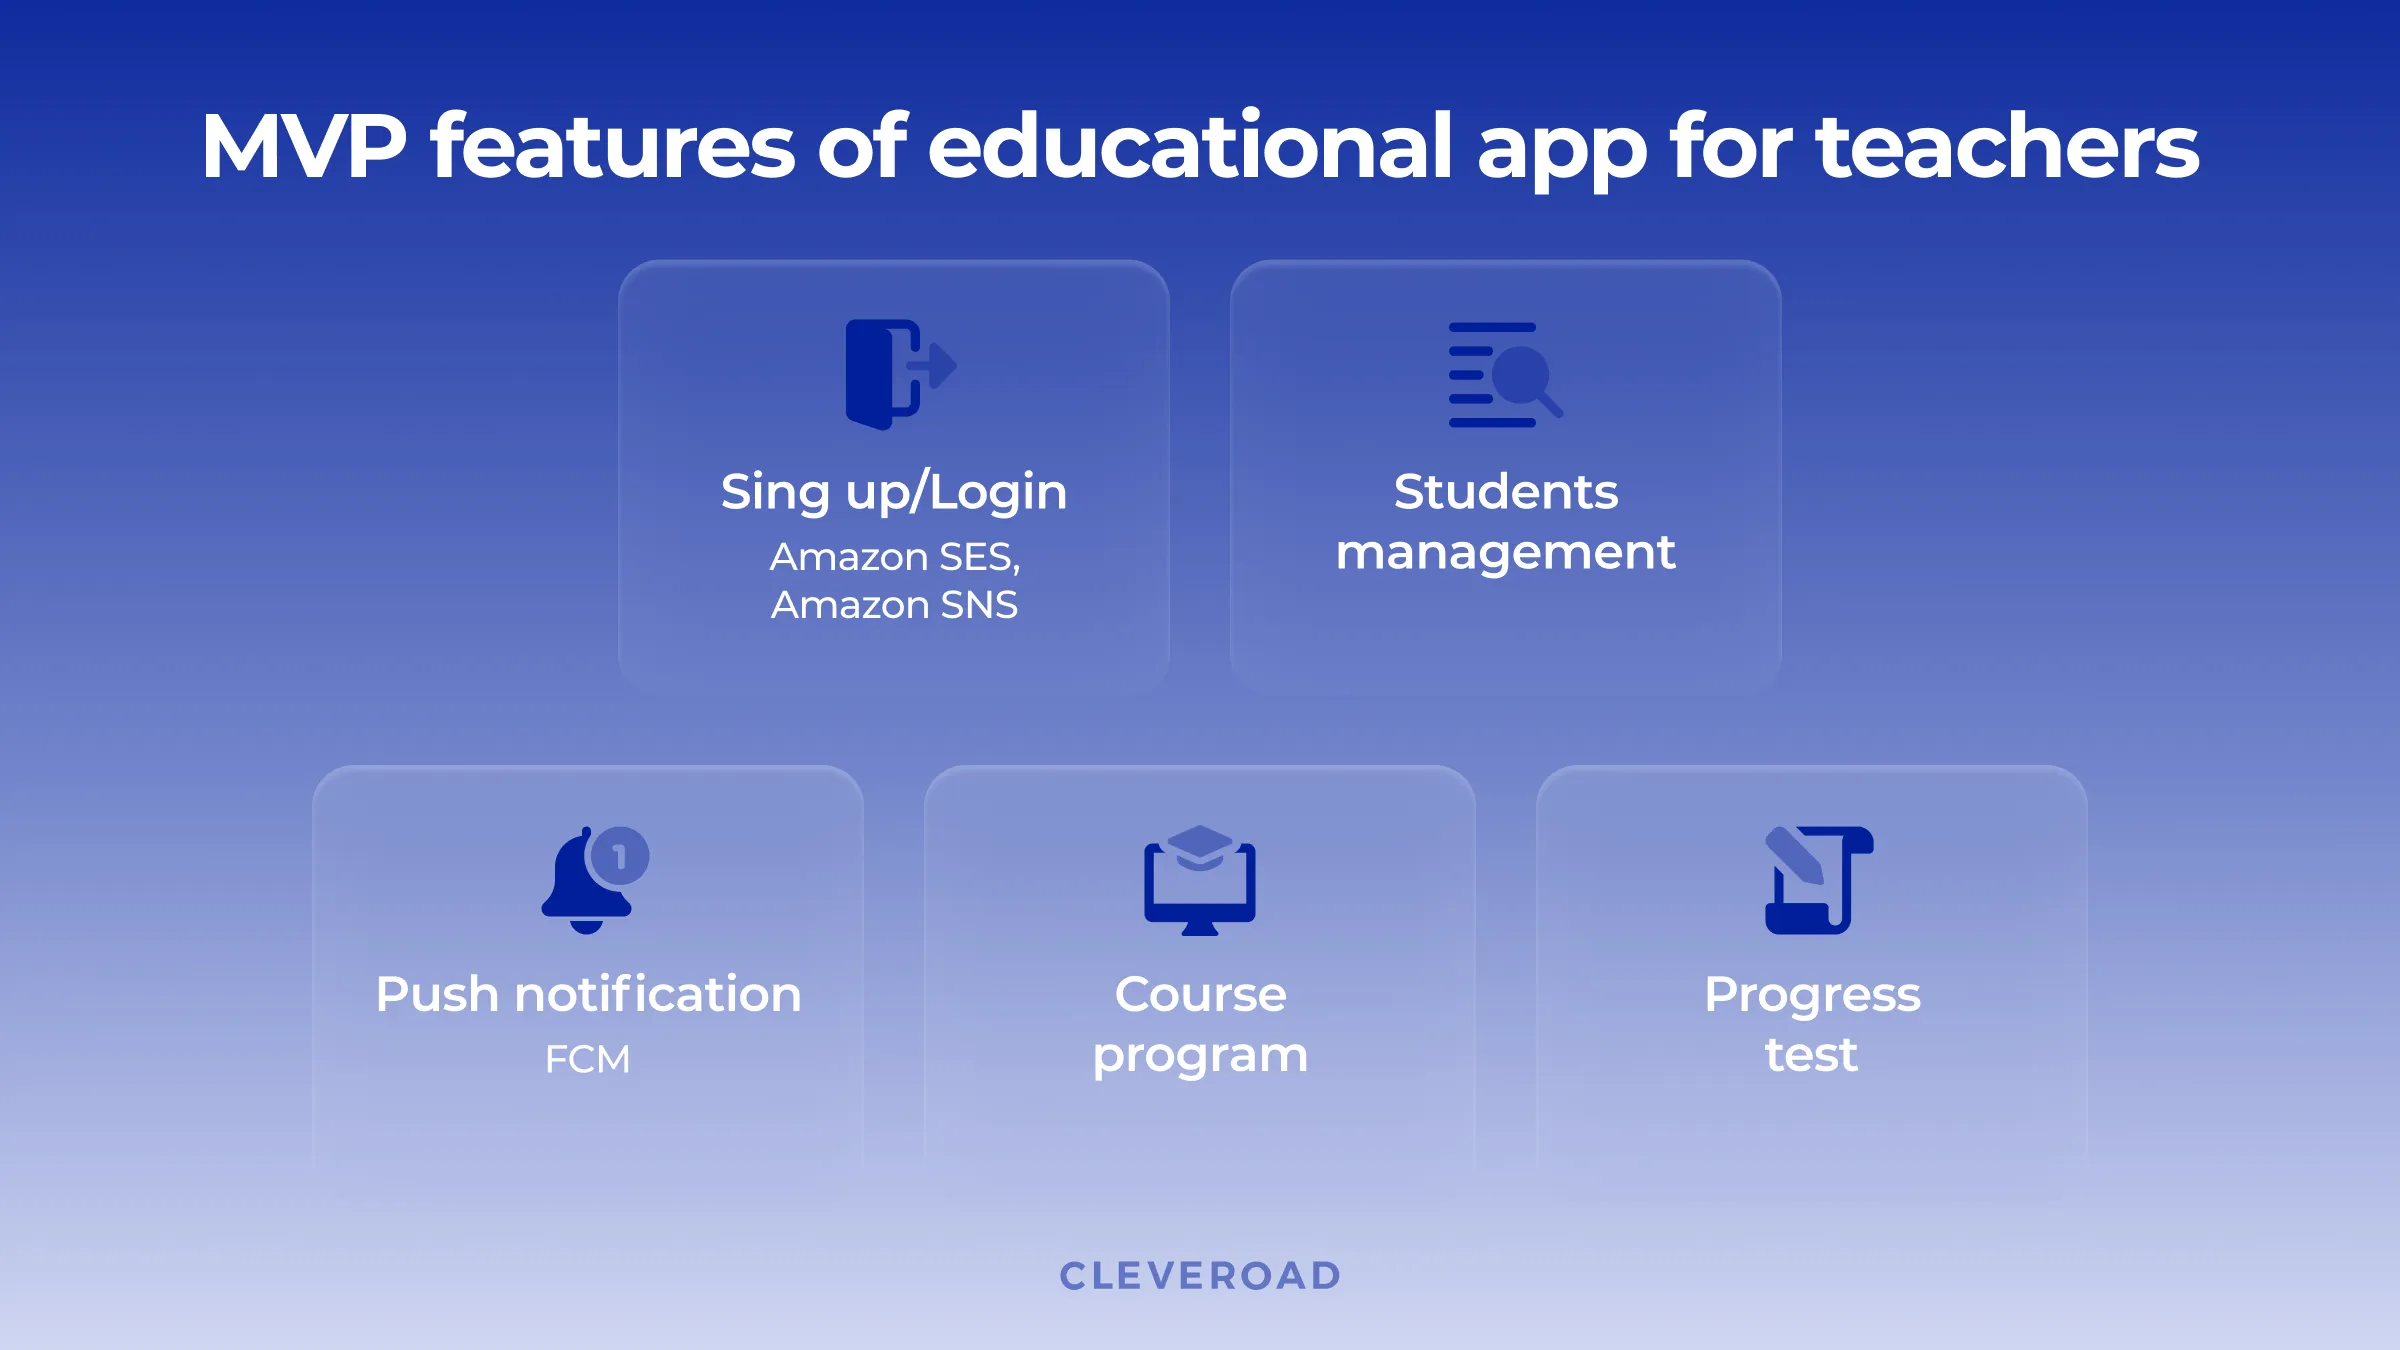 Features of an education app